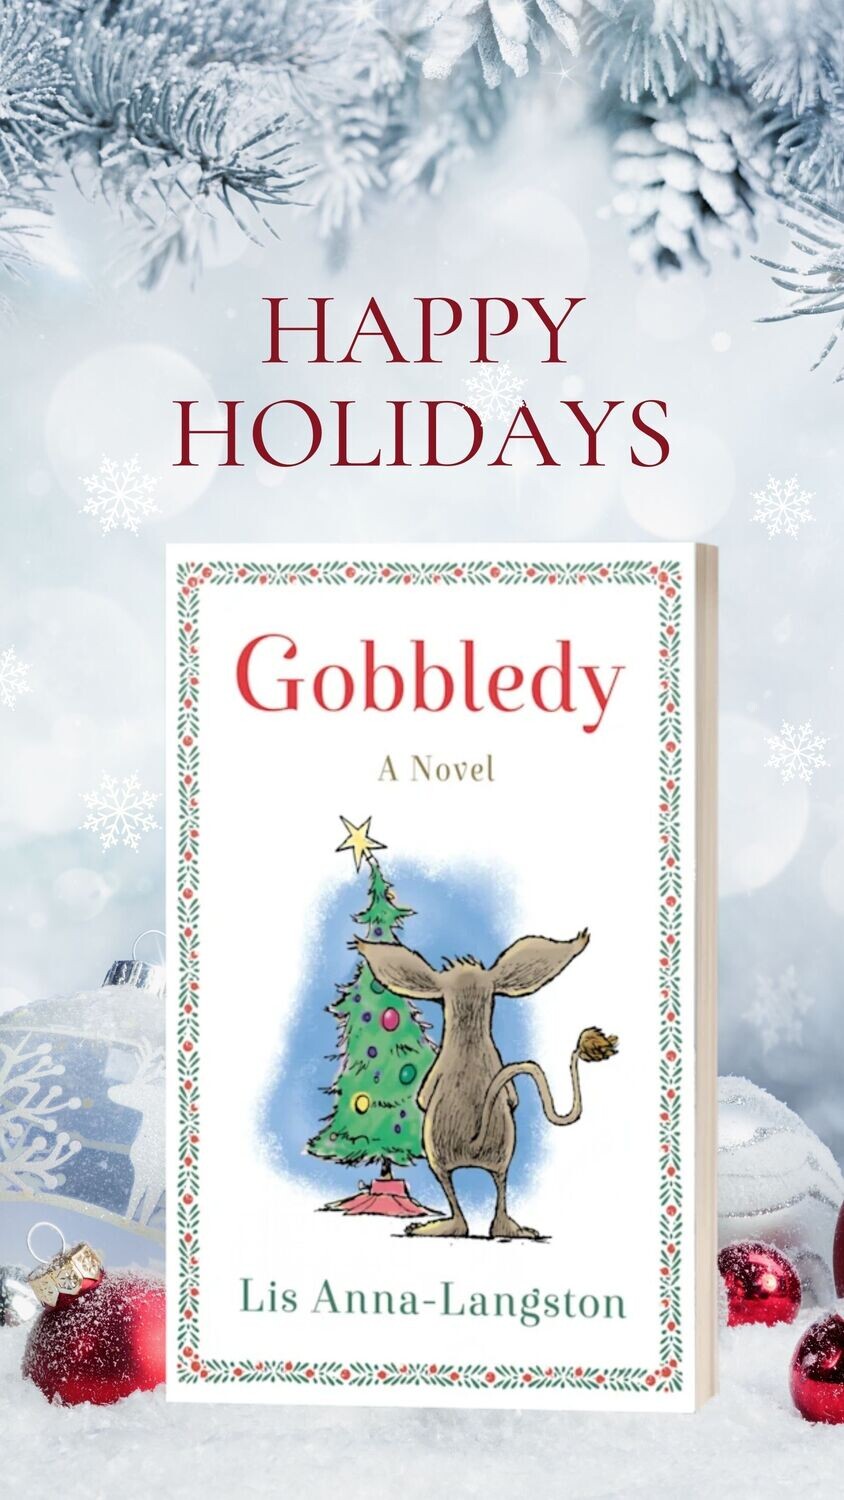 Signed Author Copy & FREE Holiday Card